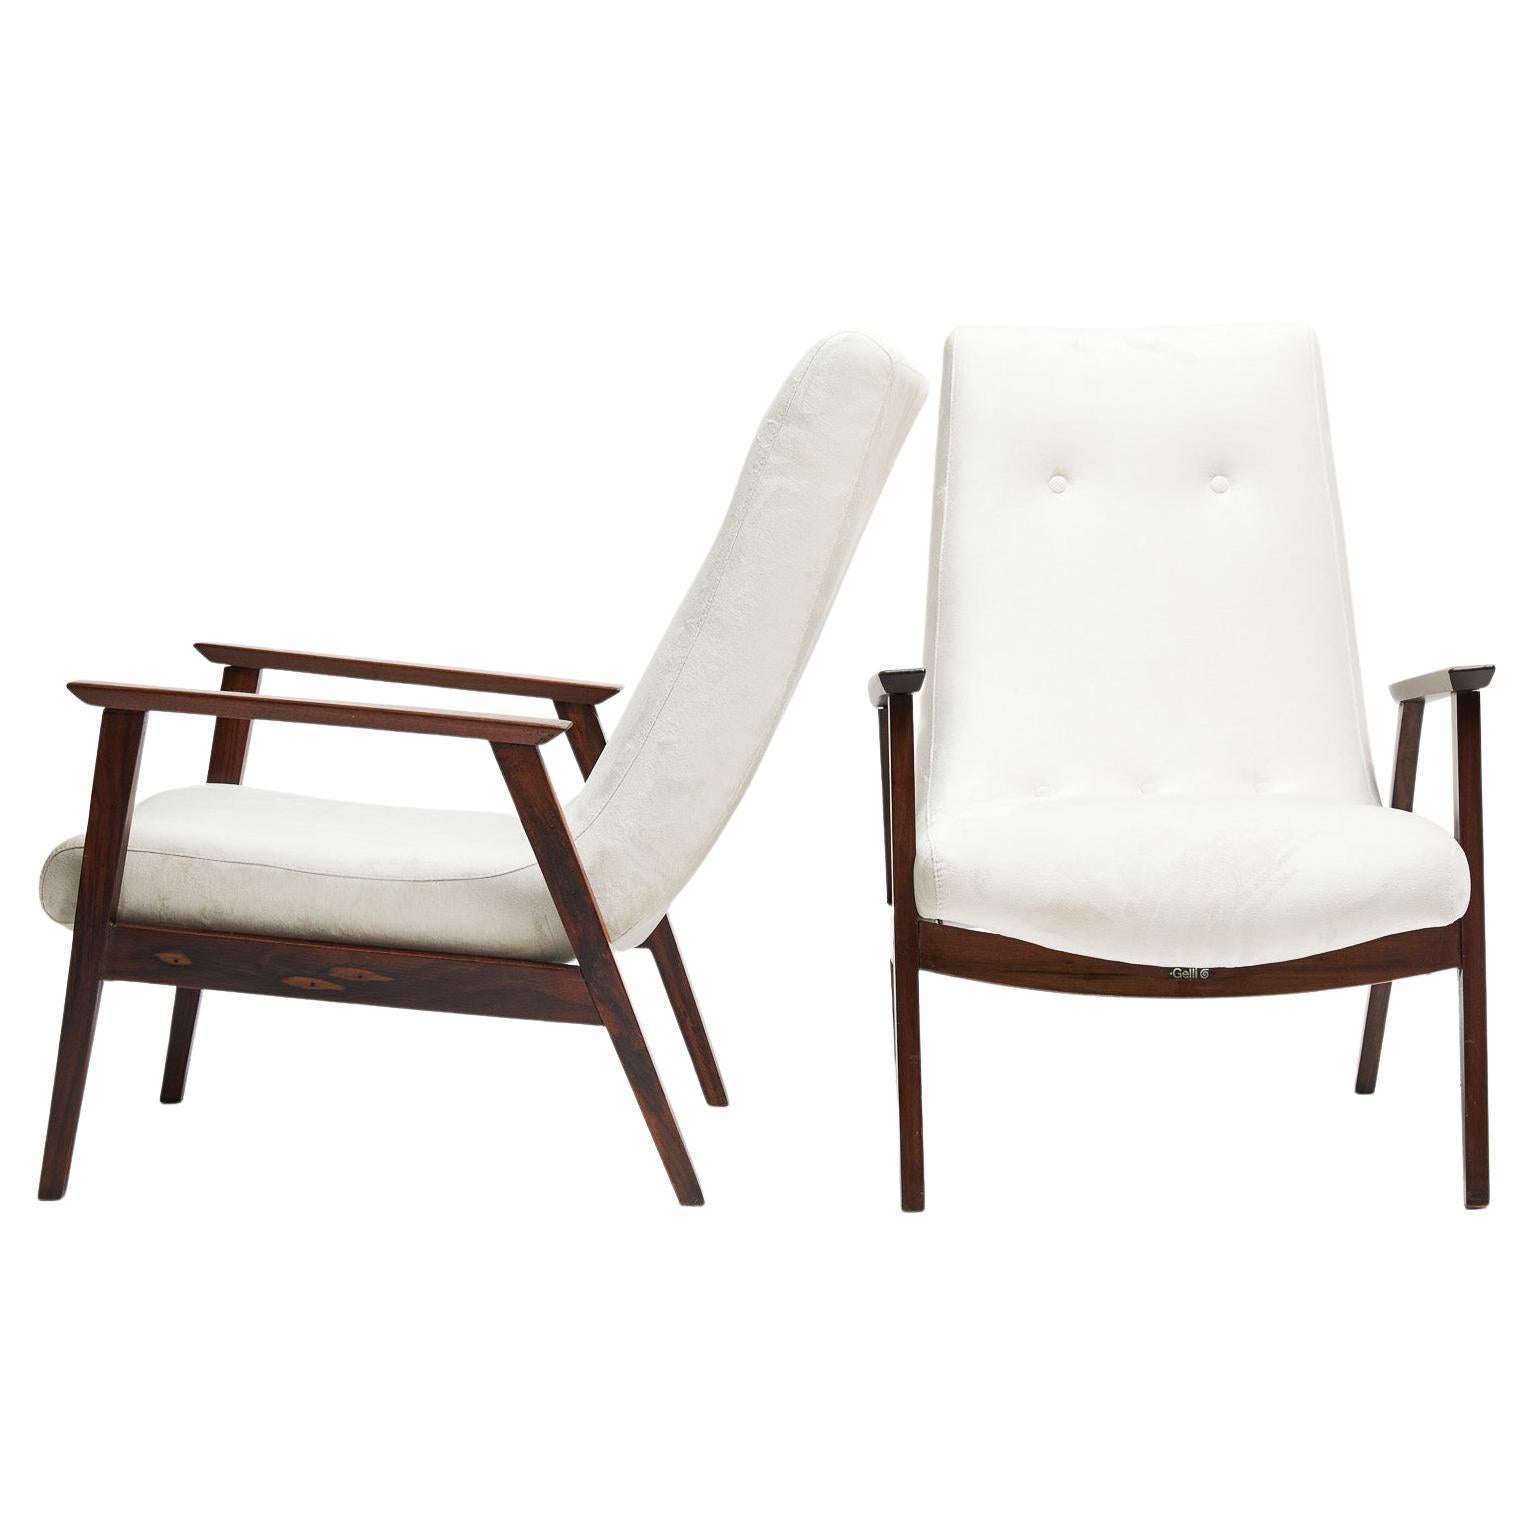 Available today, these Mid-Century Modern armchairs in hardwood & white Suede by Gelli in Brazil are gorgeous!

These super comfortable armchairs are made of hardwood and white suede. The structure is made of Brazilian hardwood and the